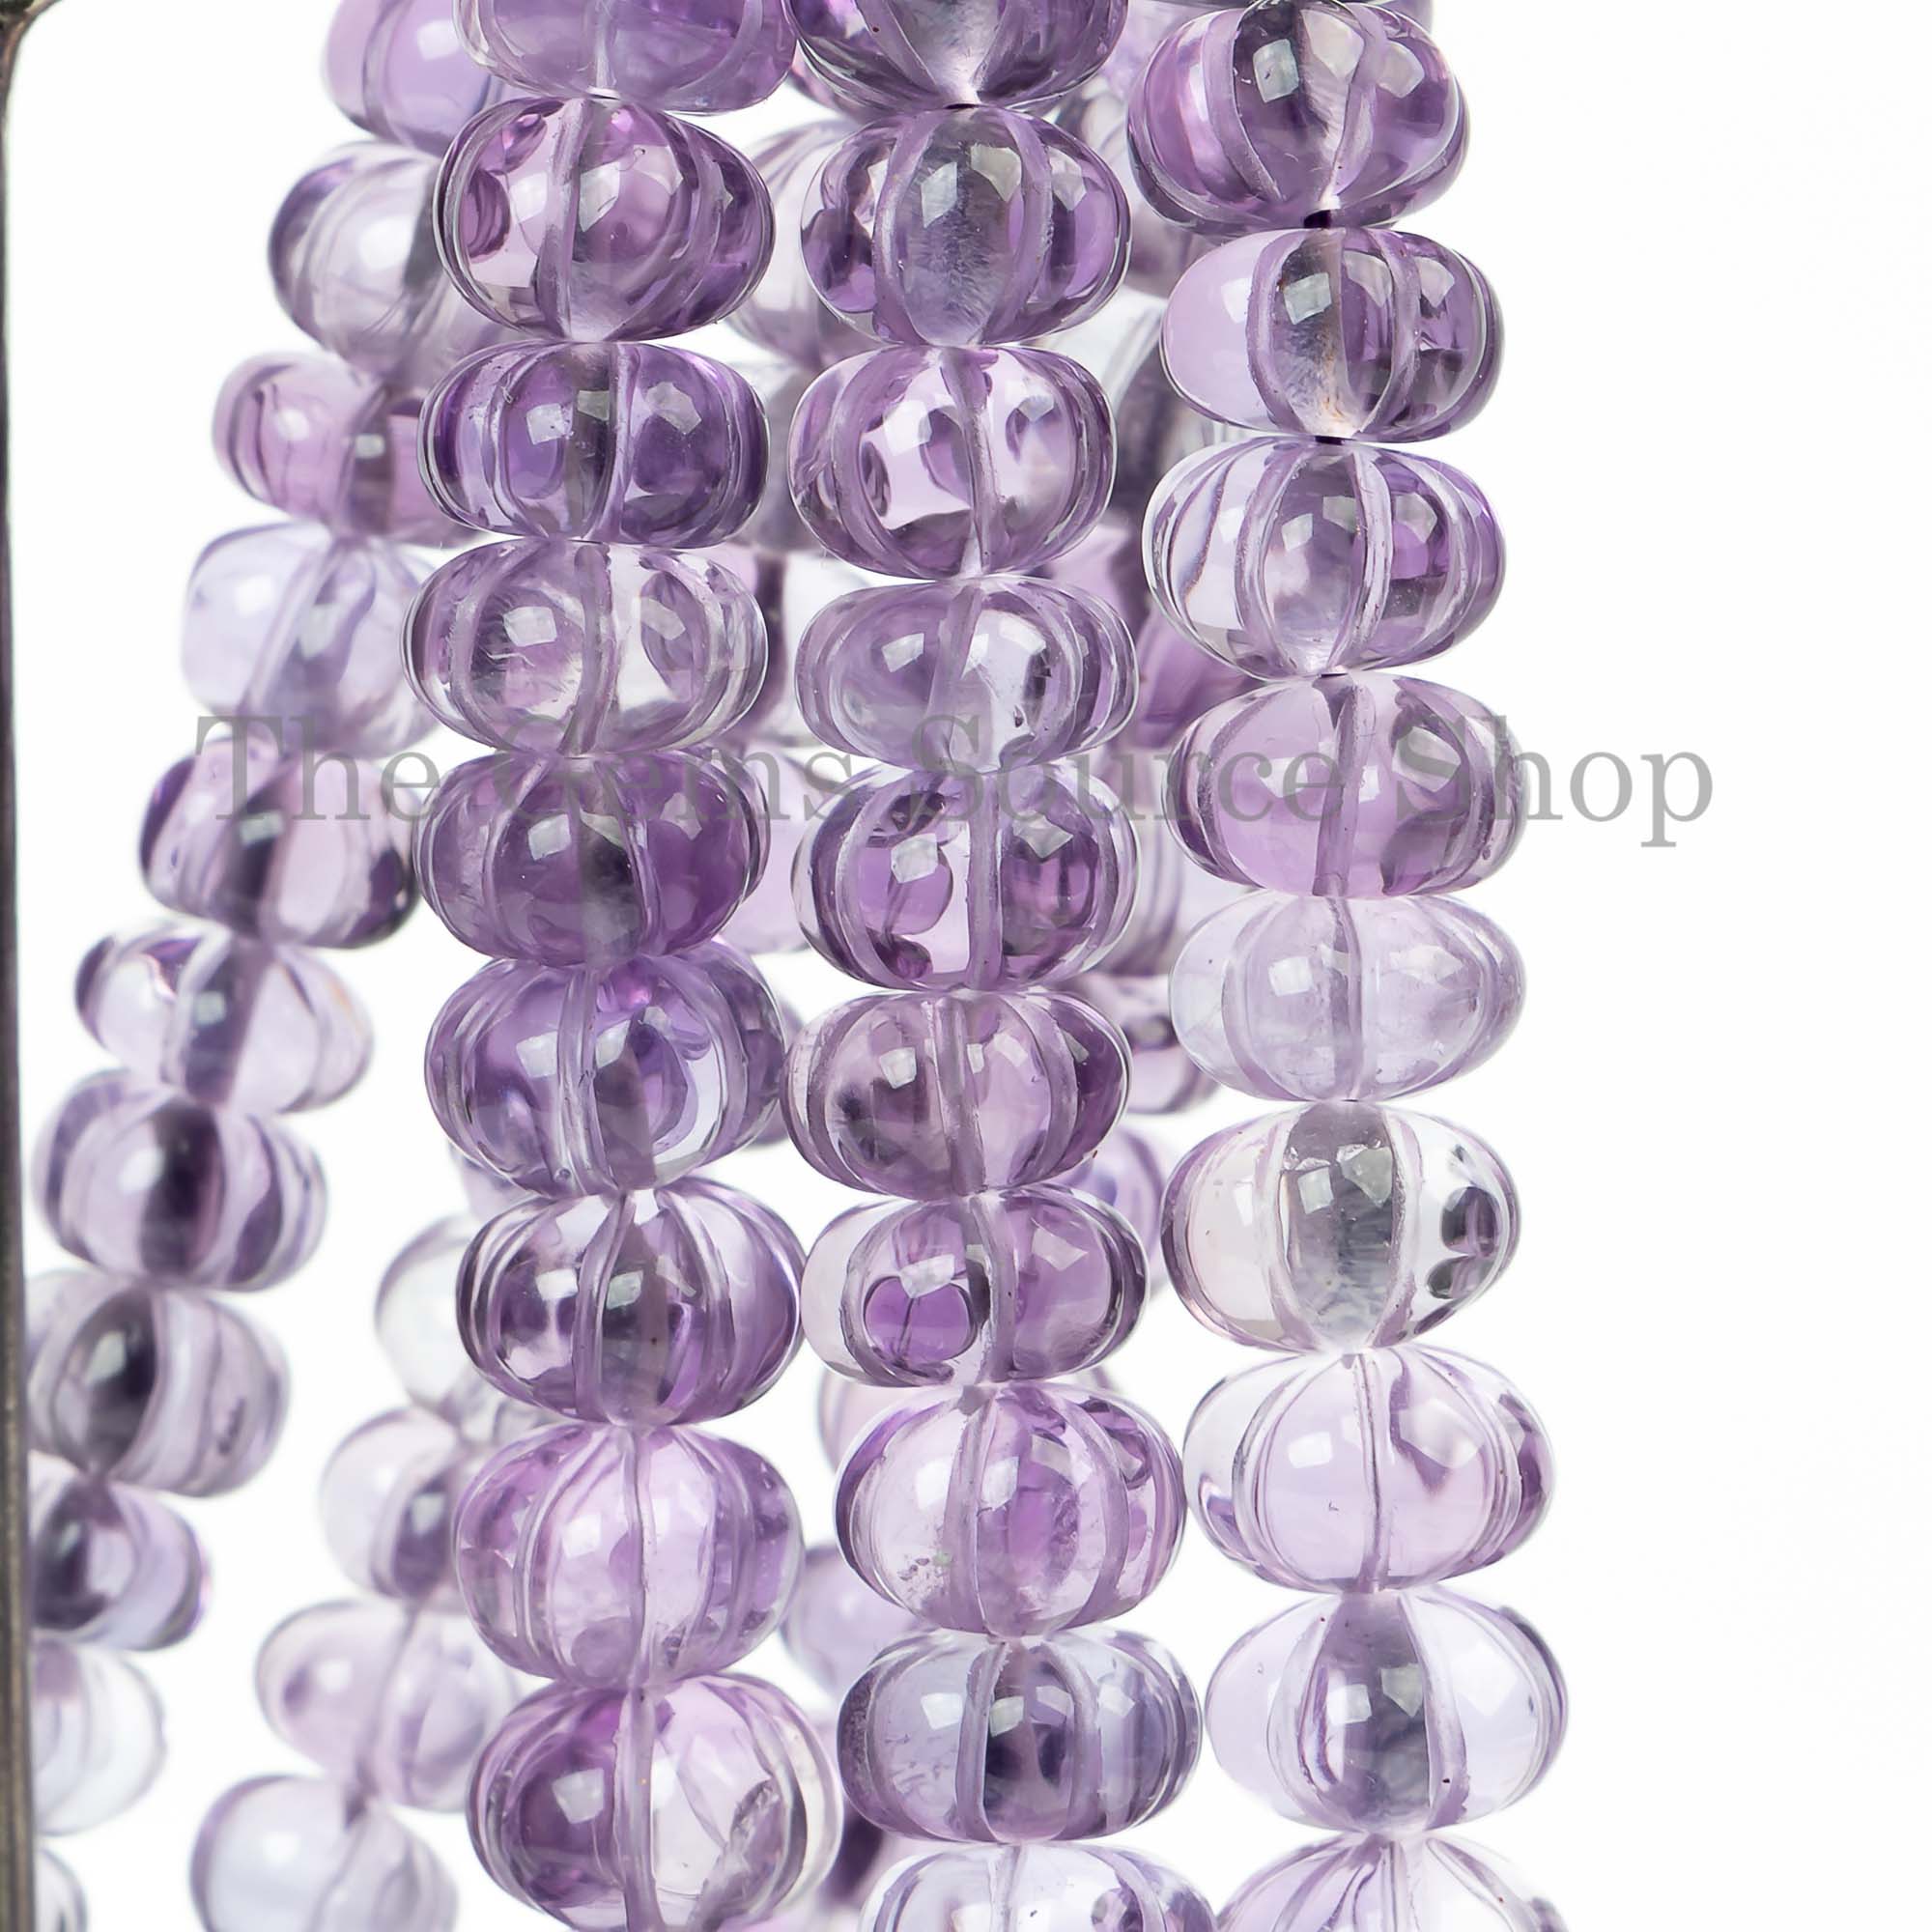 Natural Amethyst Beads, 7-12mm Amethyst Smooth Carving Beads, Pumpkin Melon Shape Beads